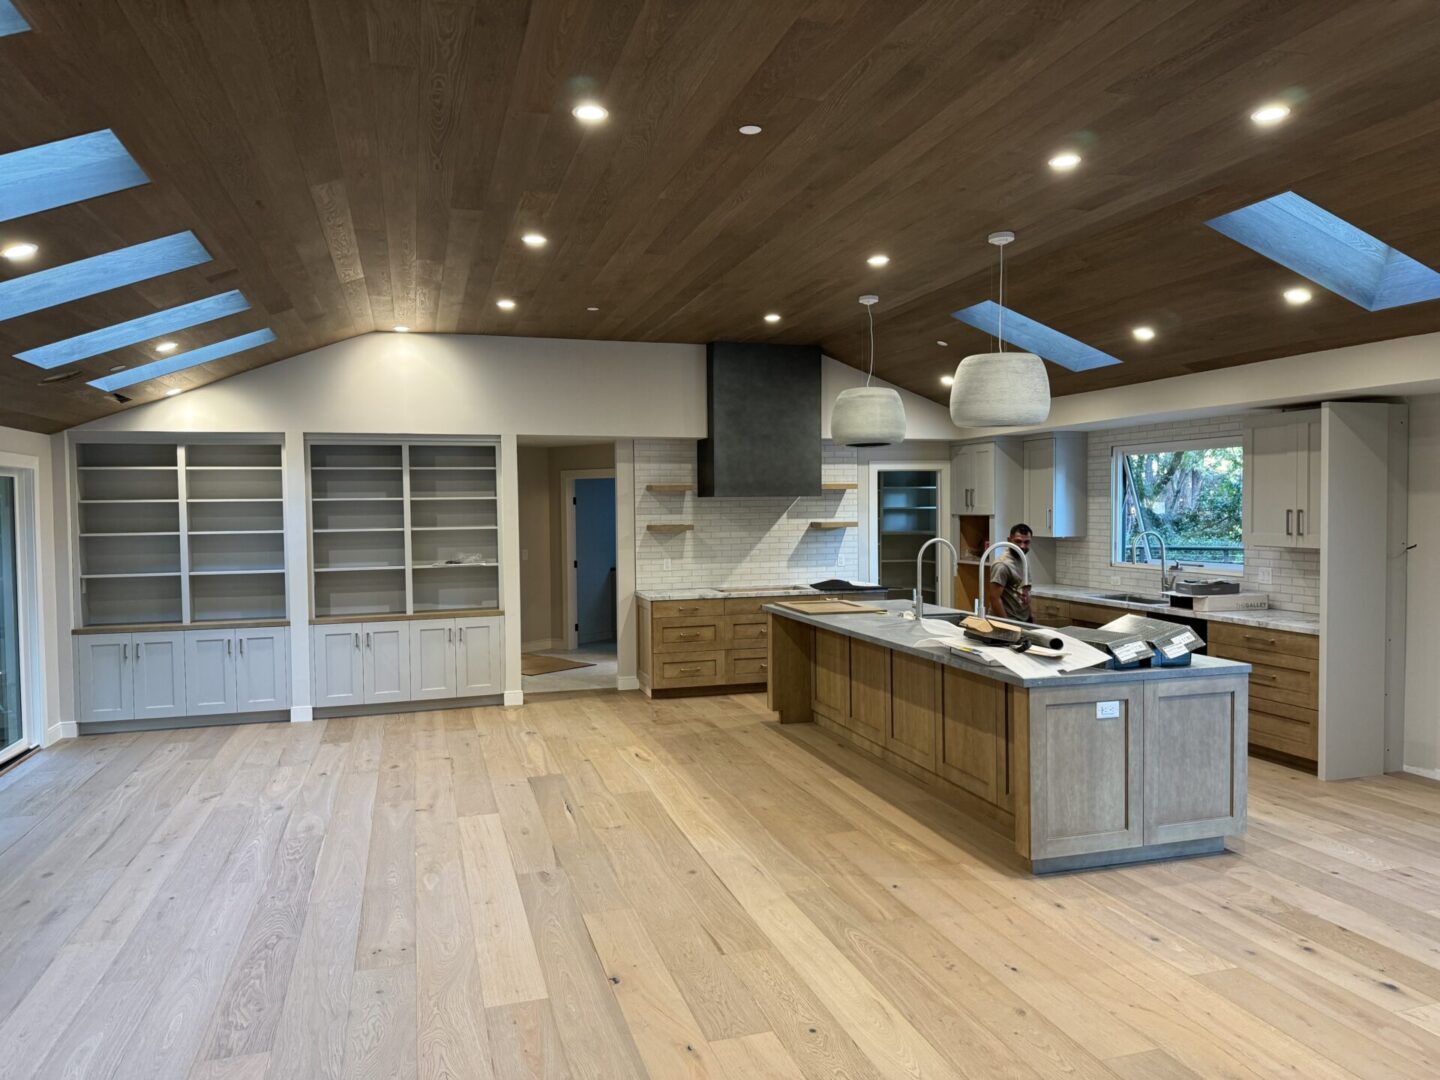 A large kitchen with wooden floors and white cabinets.